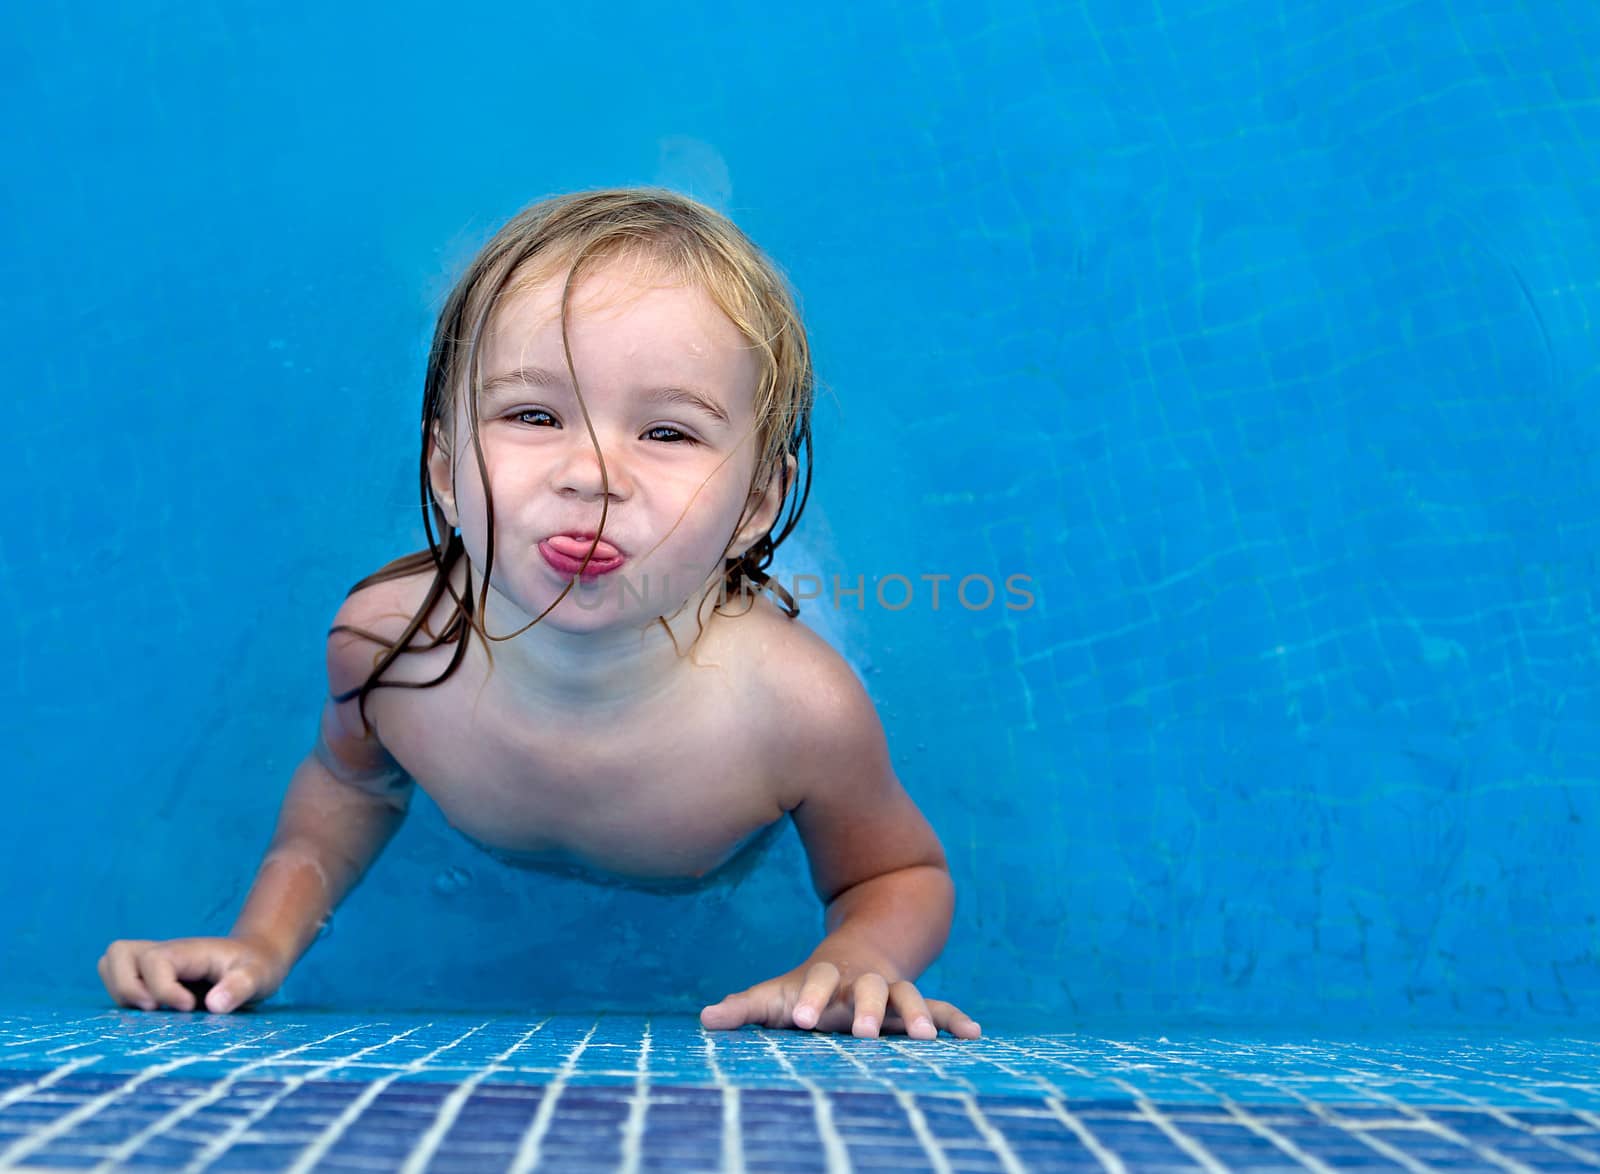 Little toddler girl posing playfully her tongue out from the blue swimming pool, copy space on the right